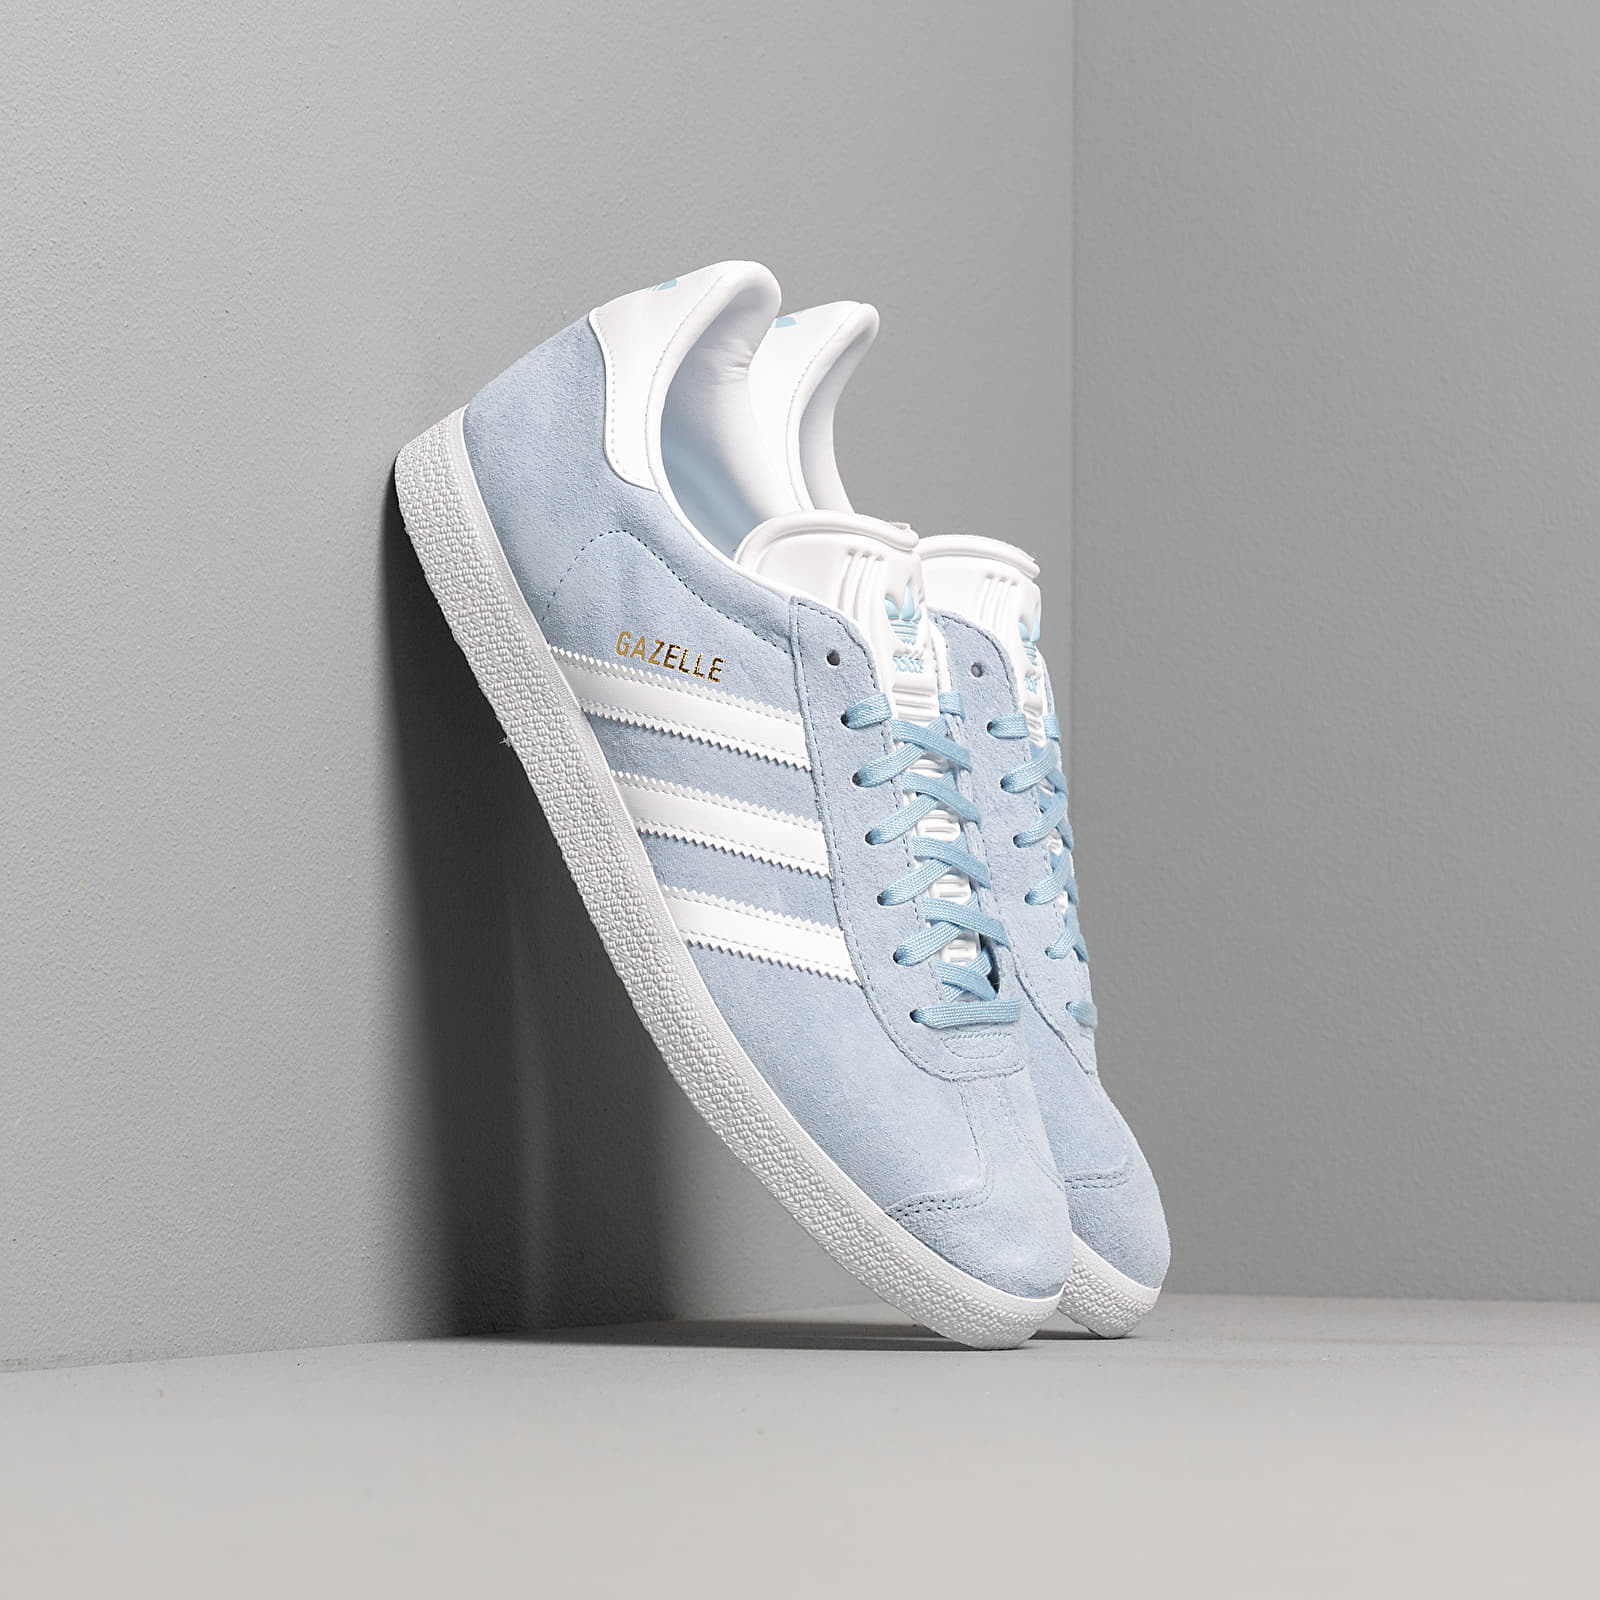 Chaussures et baskets homme adidas Gazelle Clear Sky/ Ftw White/ Gold Metalic